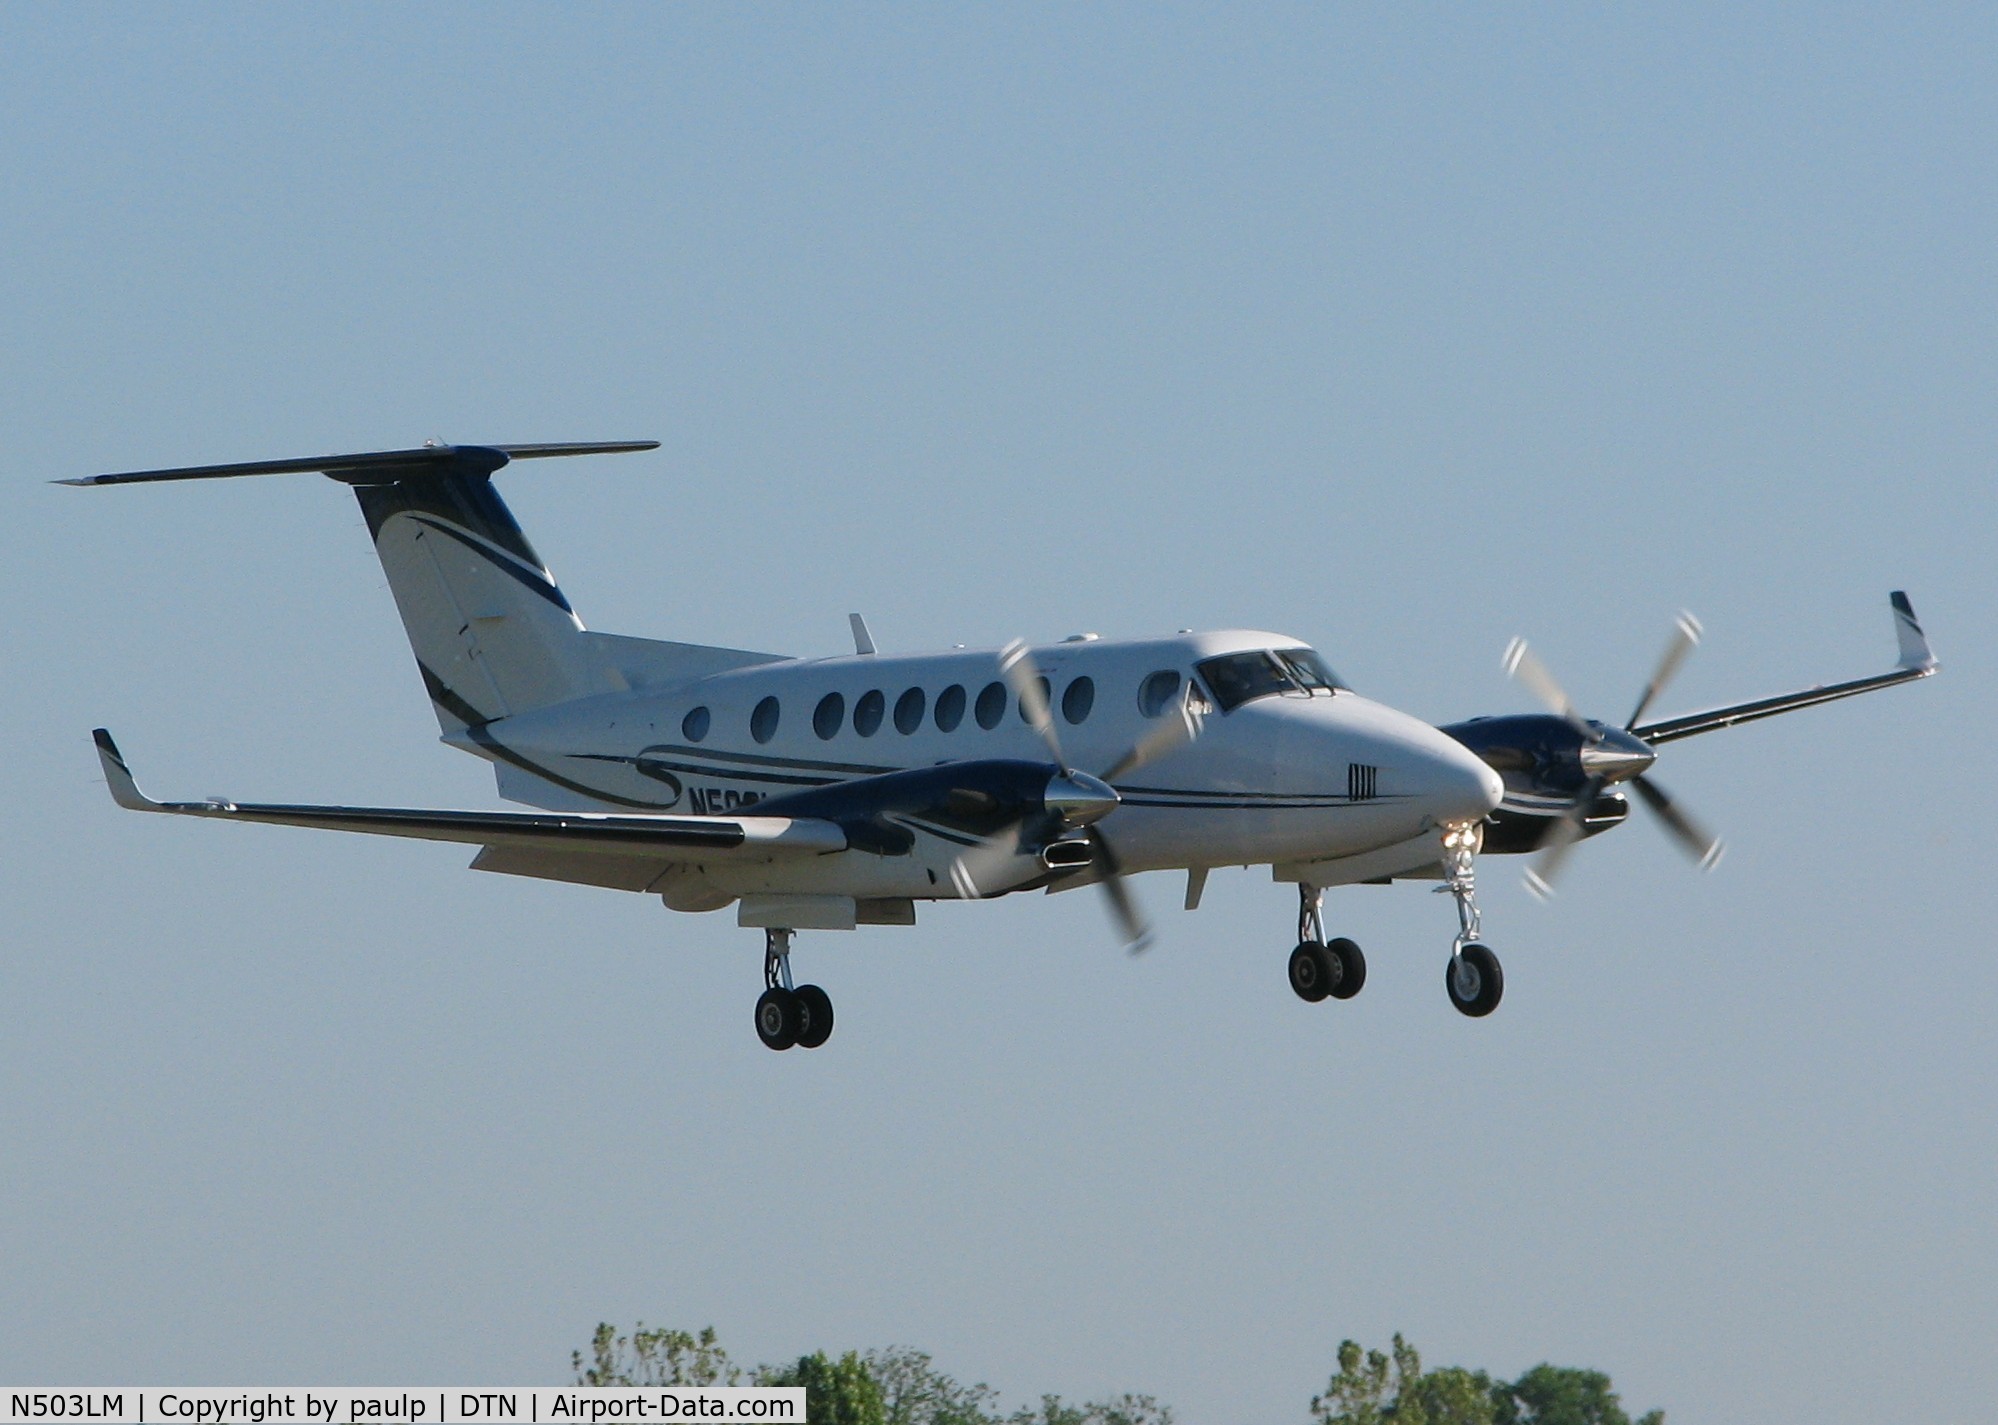 N503LM, 1997 Raytheon Aircraft Company B300 C/N FL-182, Landing on Rwy 14 at the Shreveport Downtown Airport.